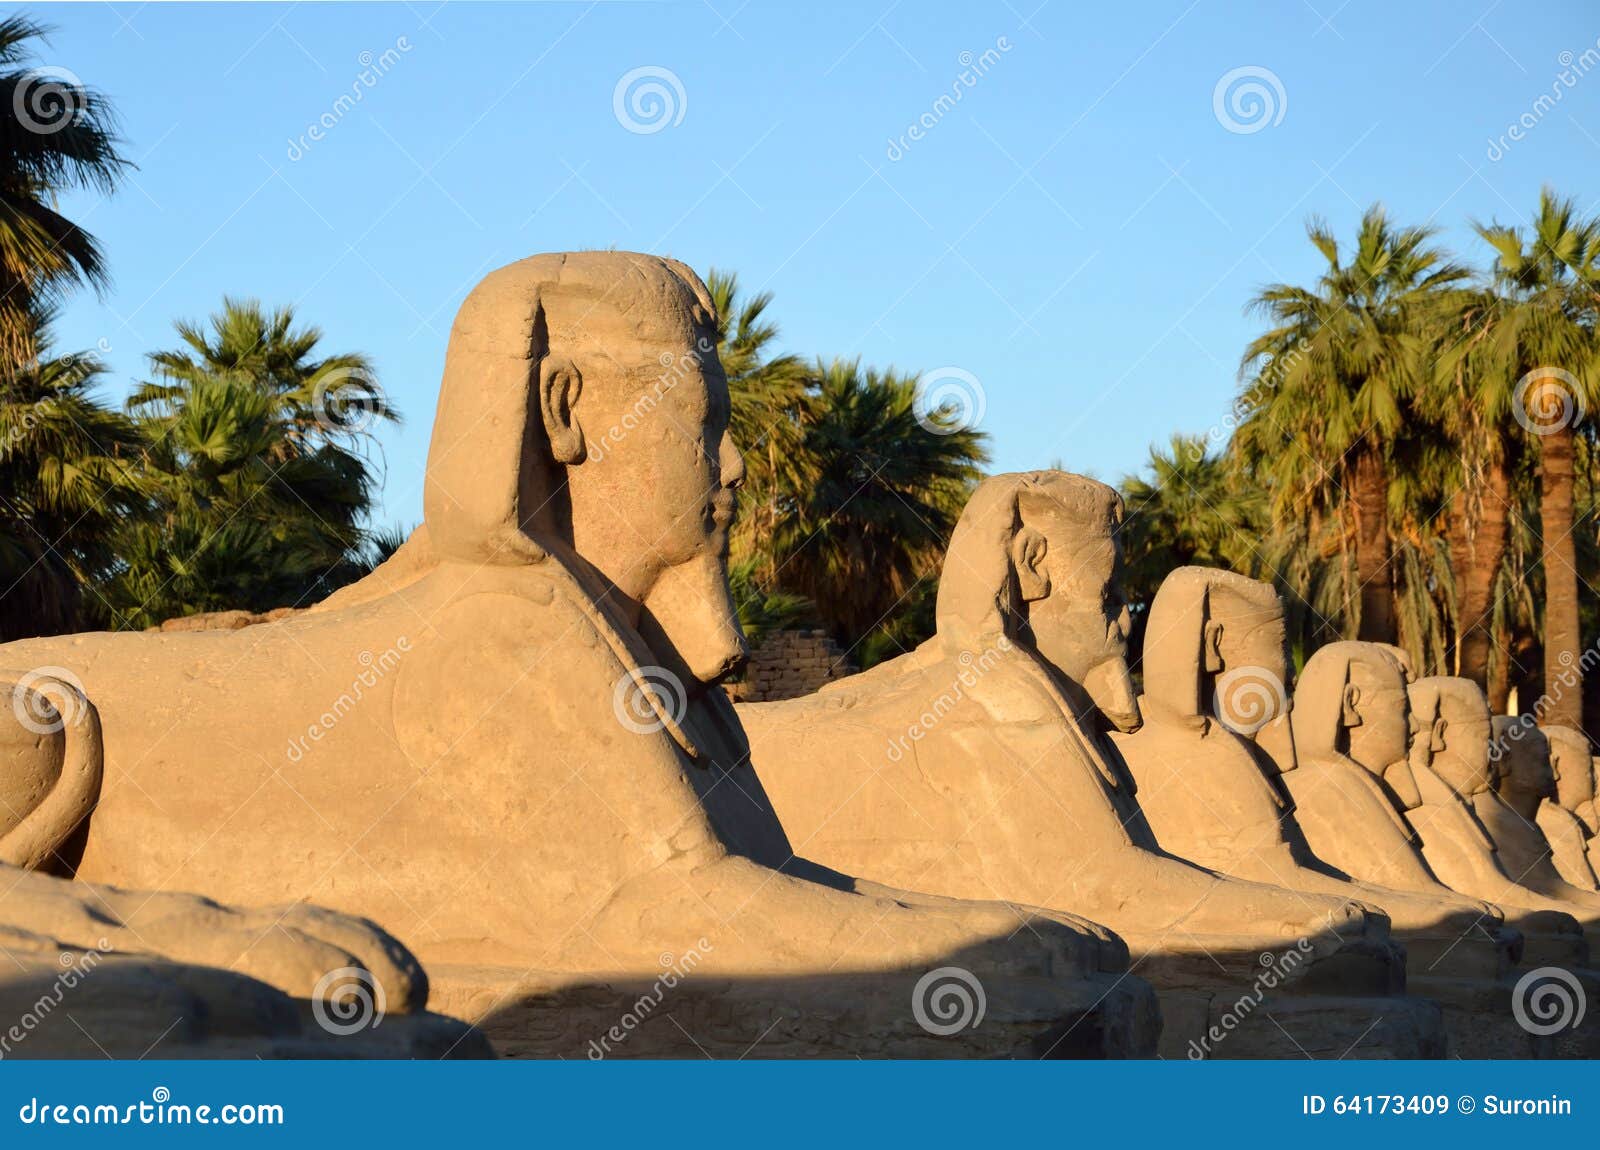 avenue of sphinxes